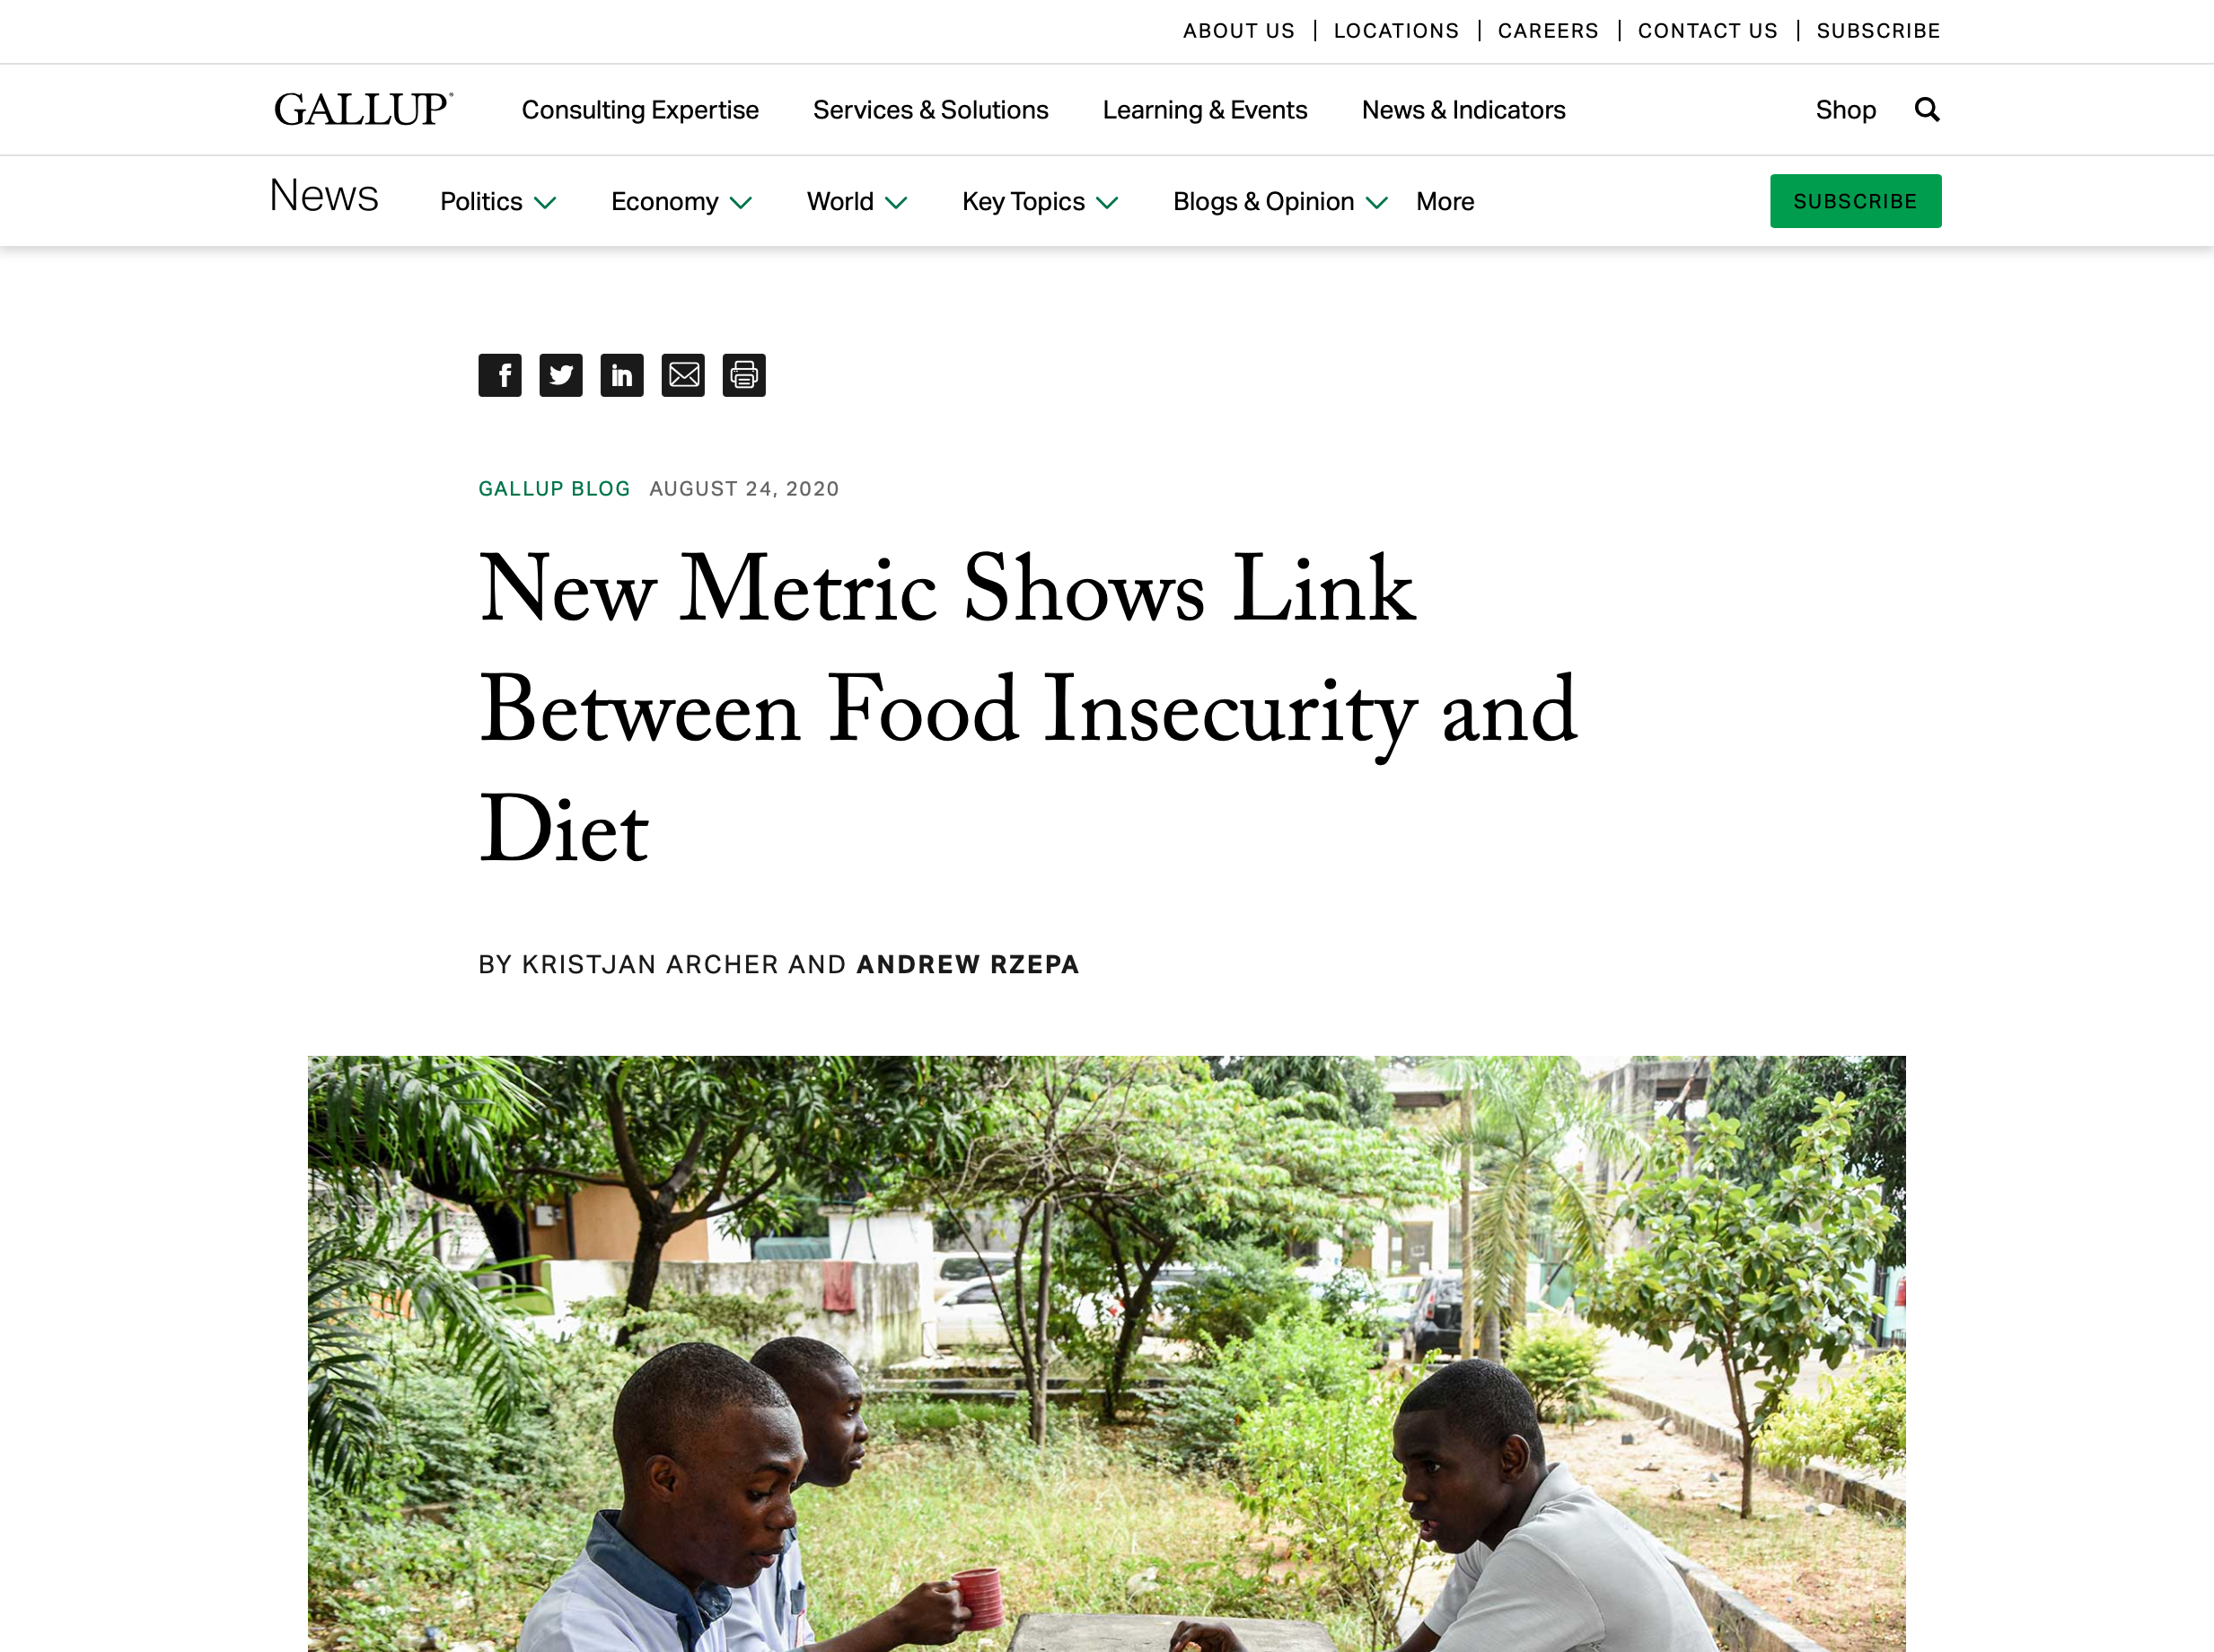 New Metric Shows Link Between Food Insecurity and Diet